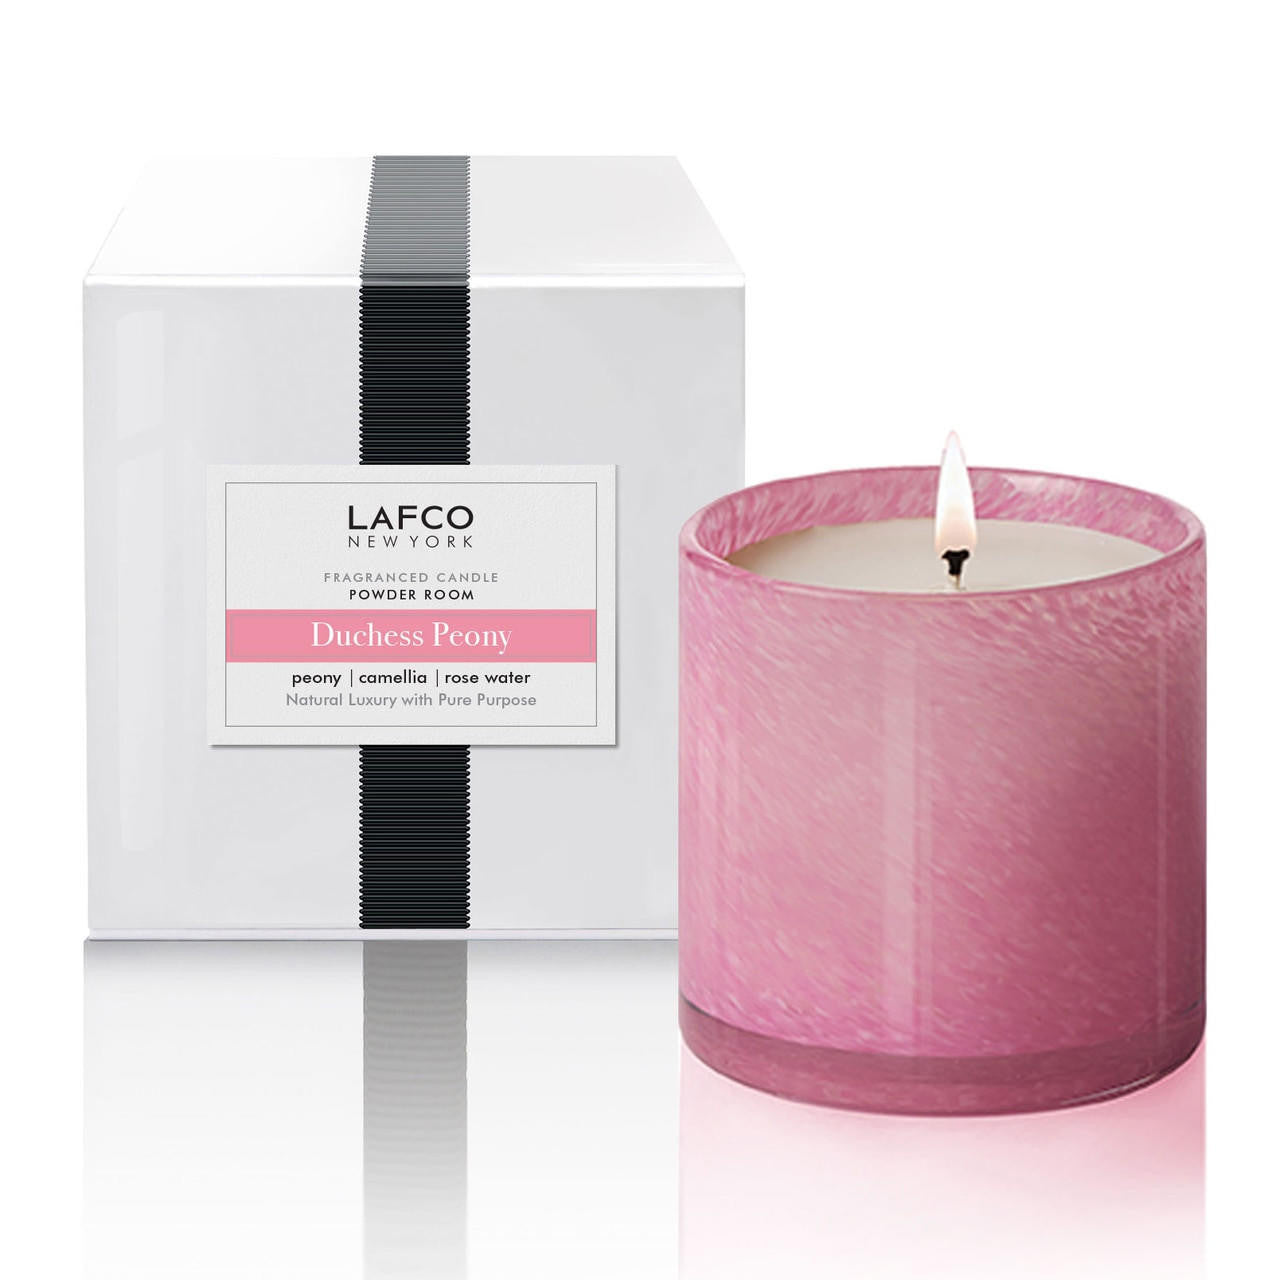  Lafco Duchess Peony Candle 